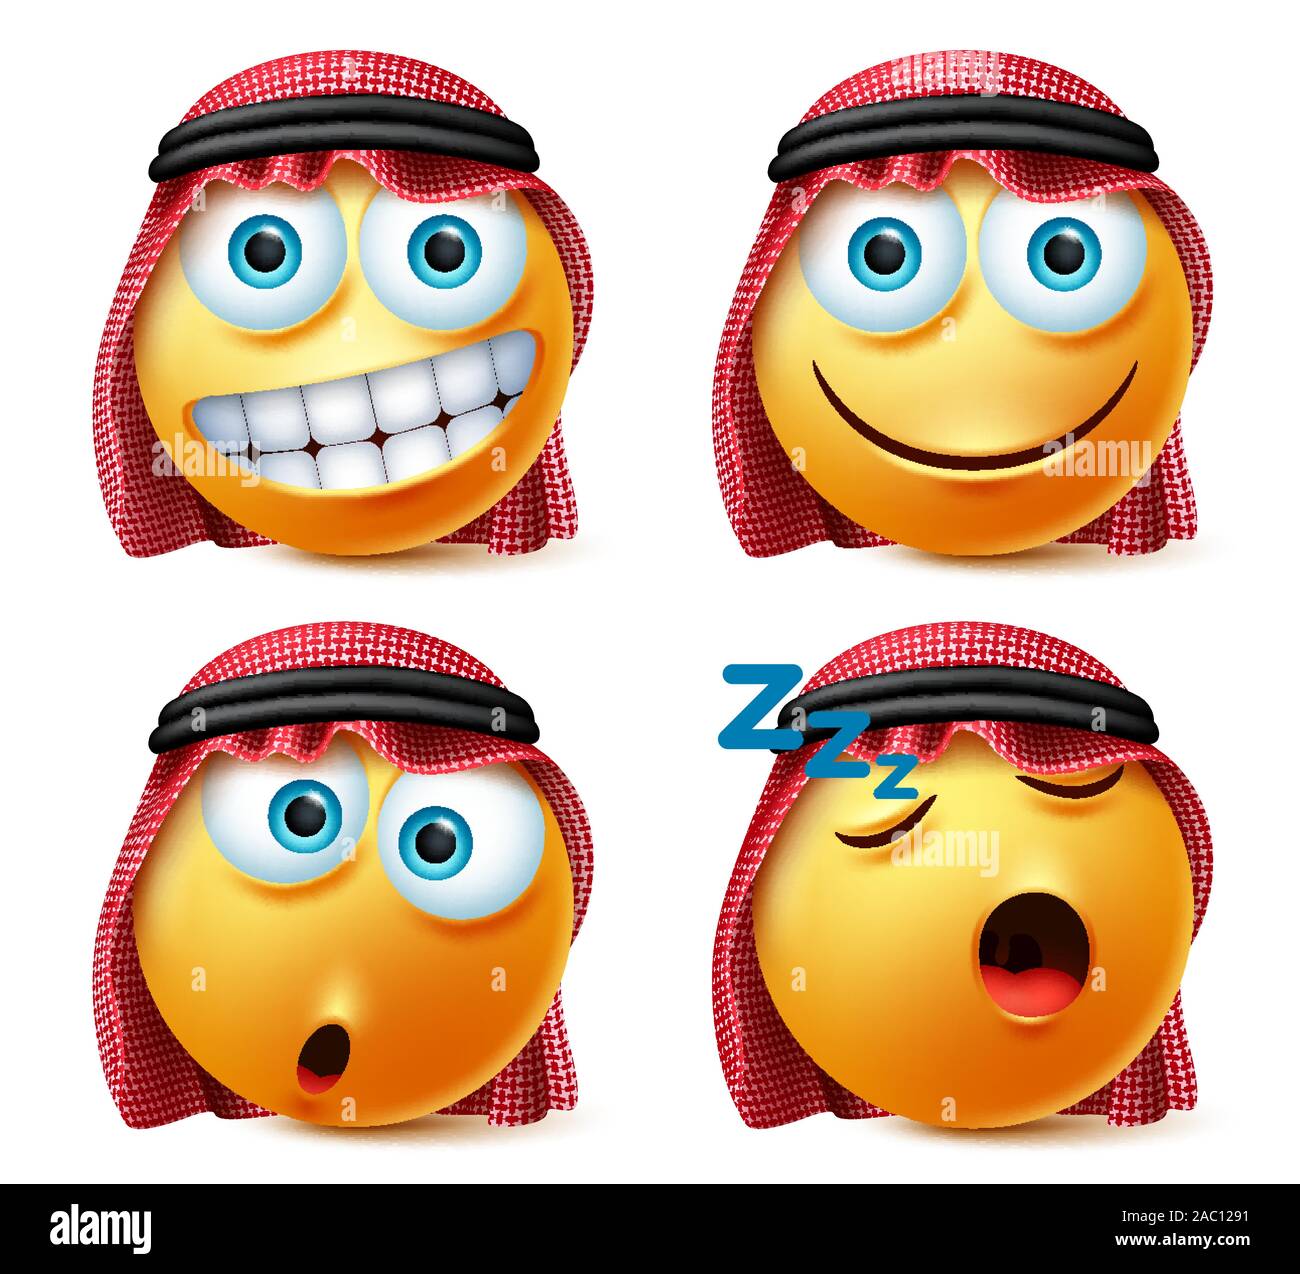 Saudi arab smiley emoticons vector set. Saudi arab smiley face emojis with sleeping, surprise and happy expressions for avatar character collection. Stock Vector